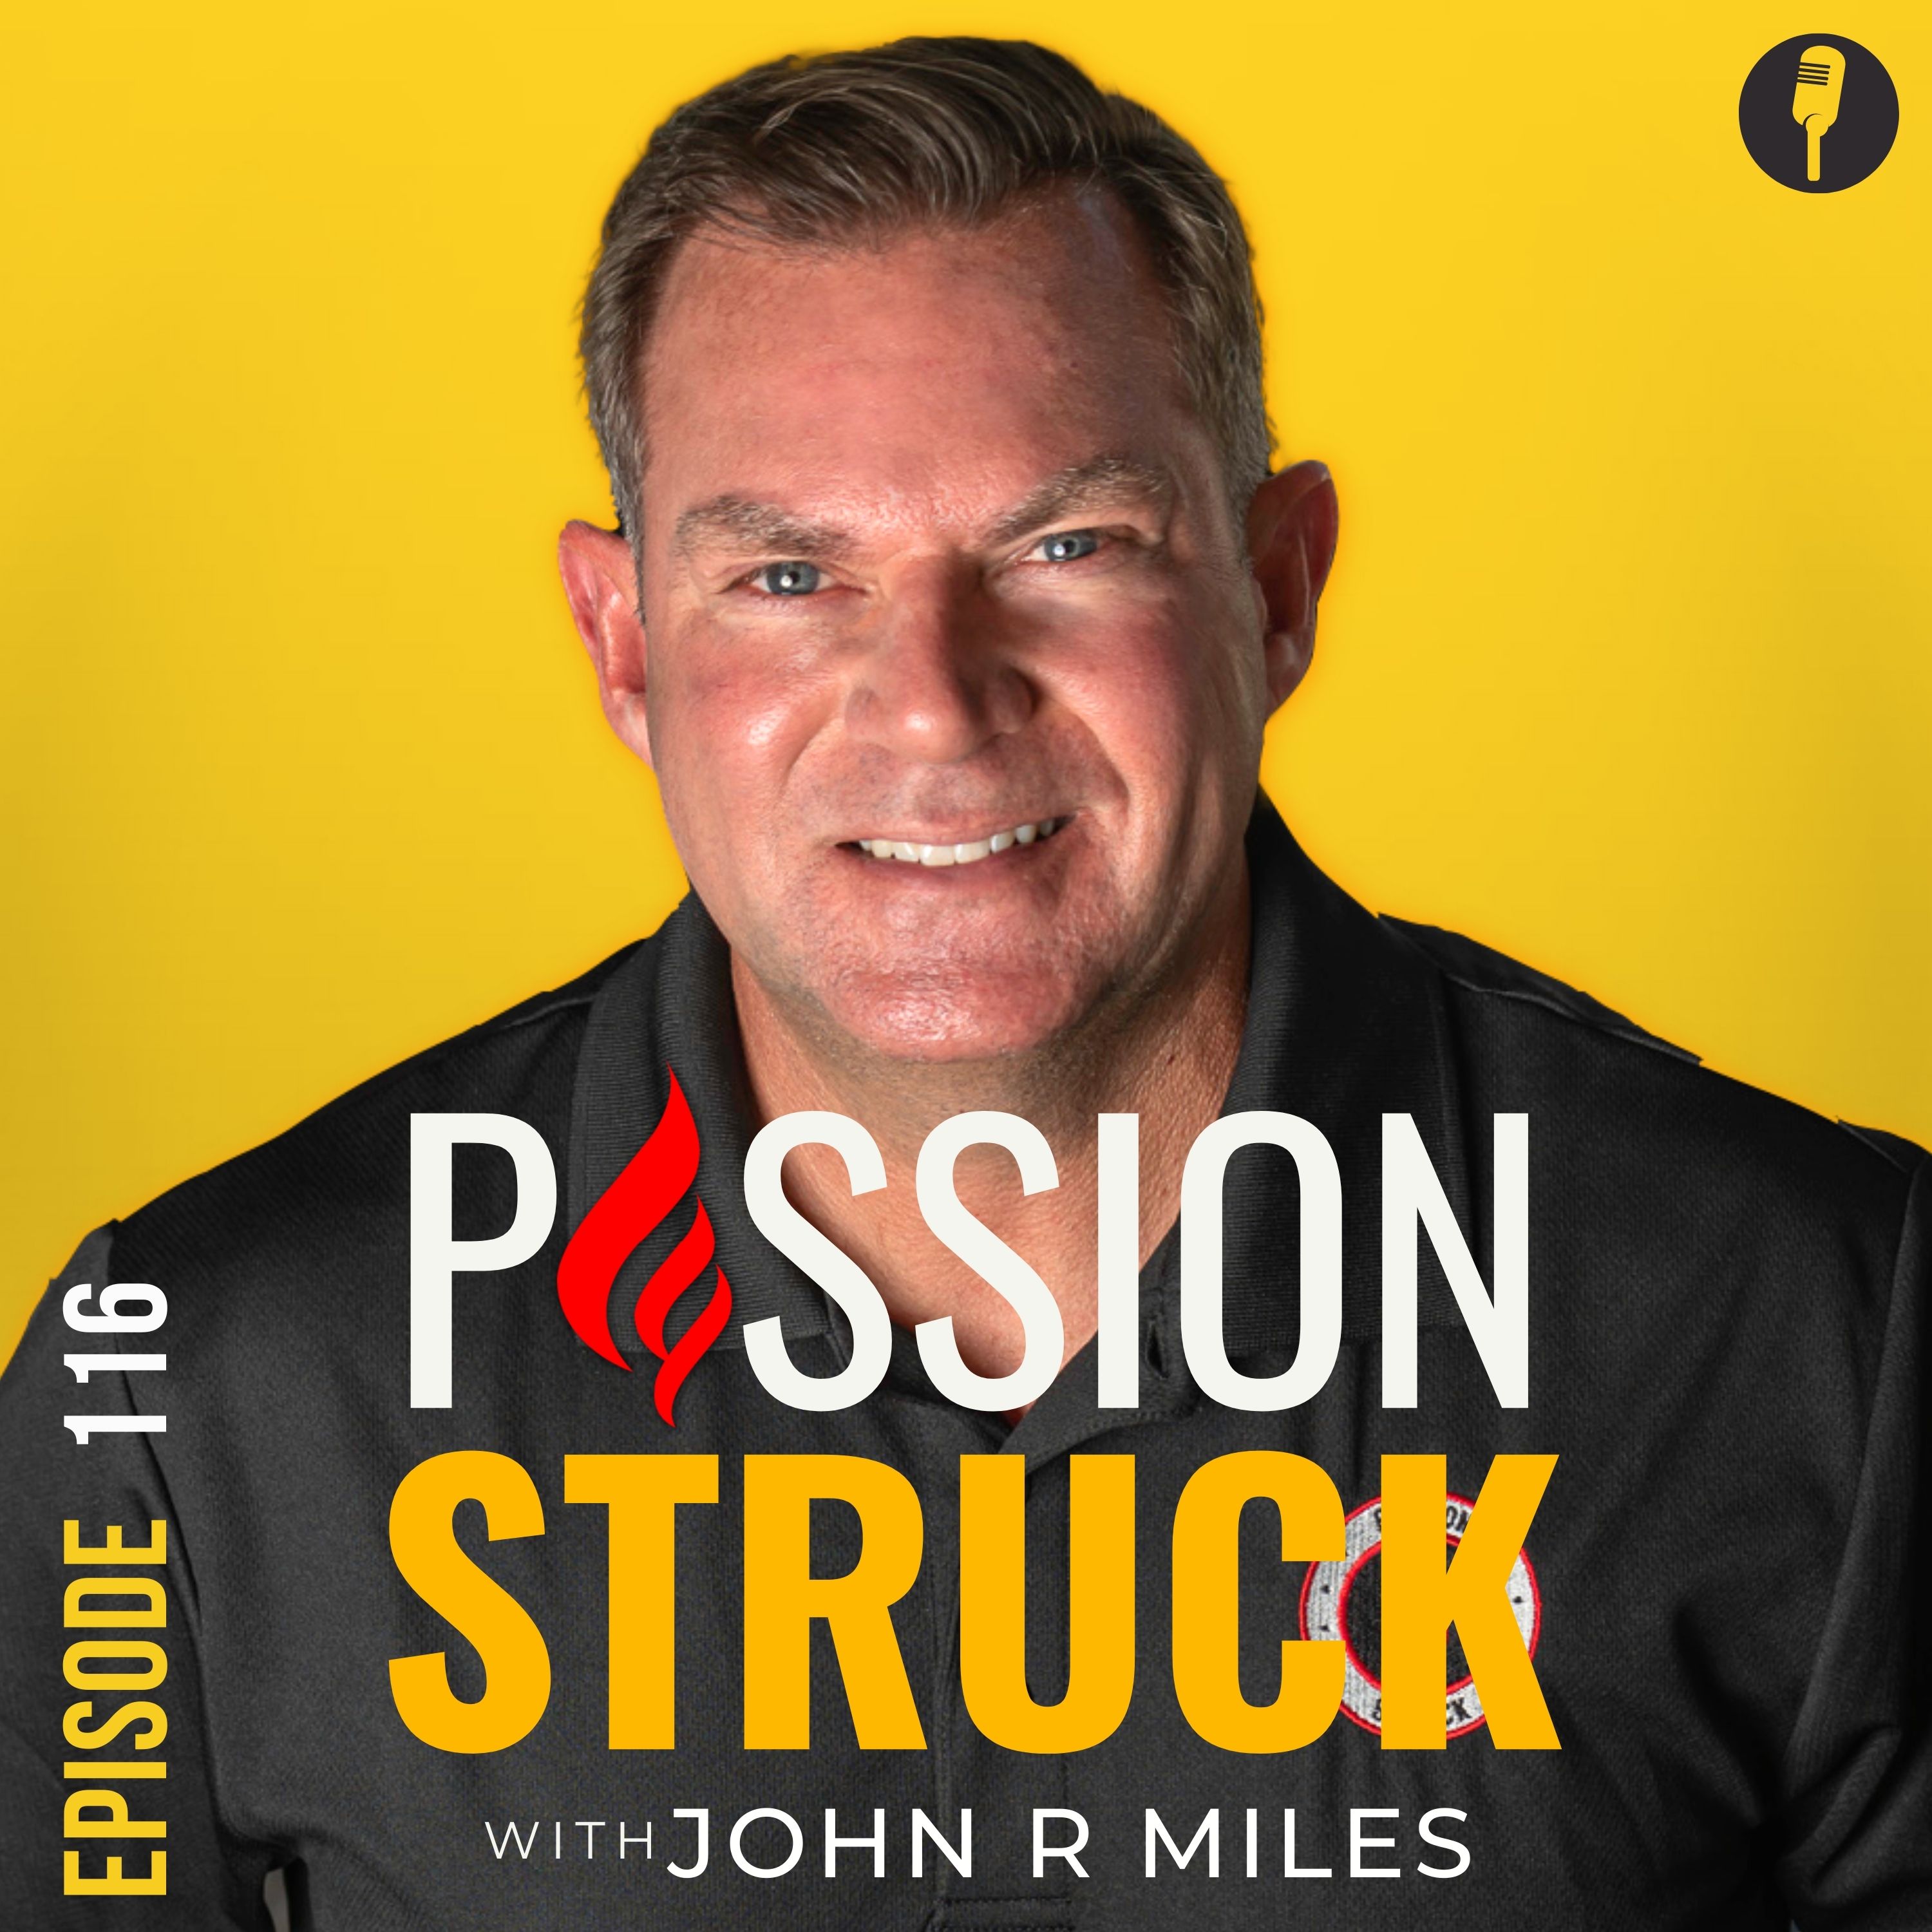 Passion Struck with John R. Miles album cover for episode 116 on healthy esteem